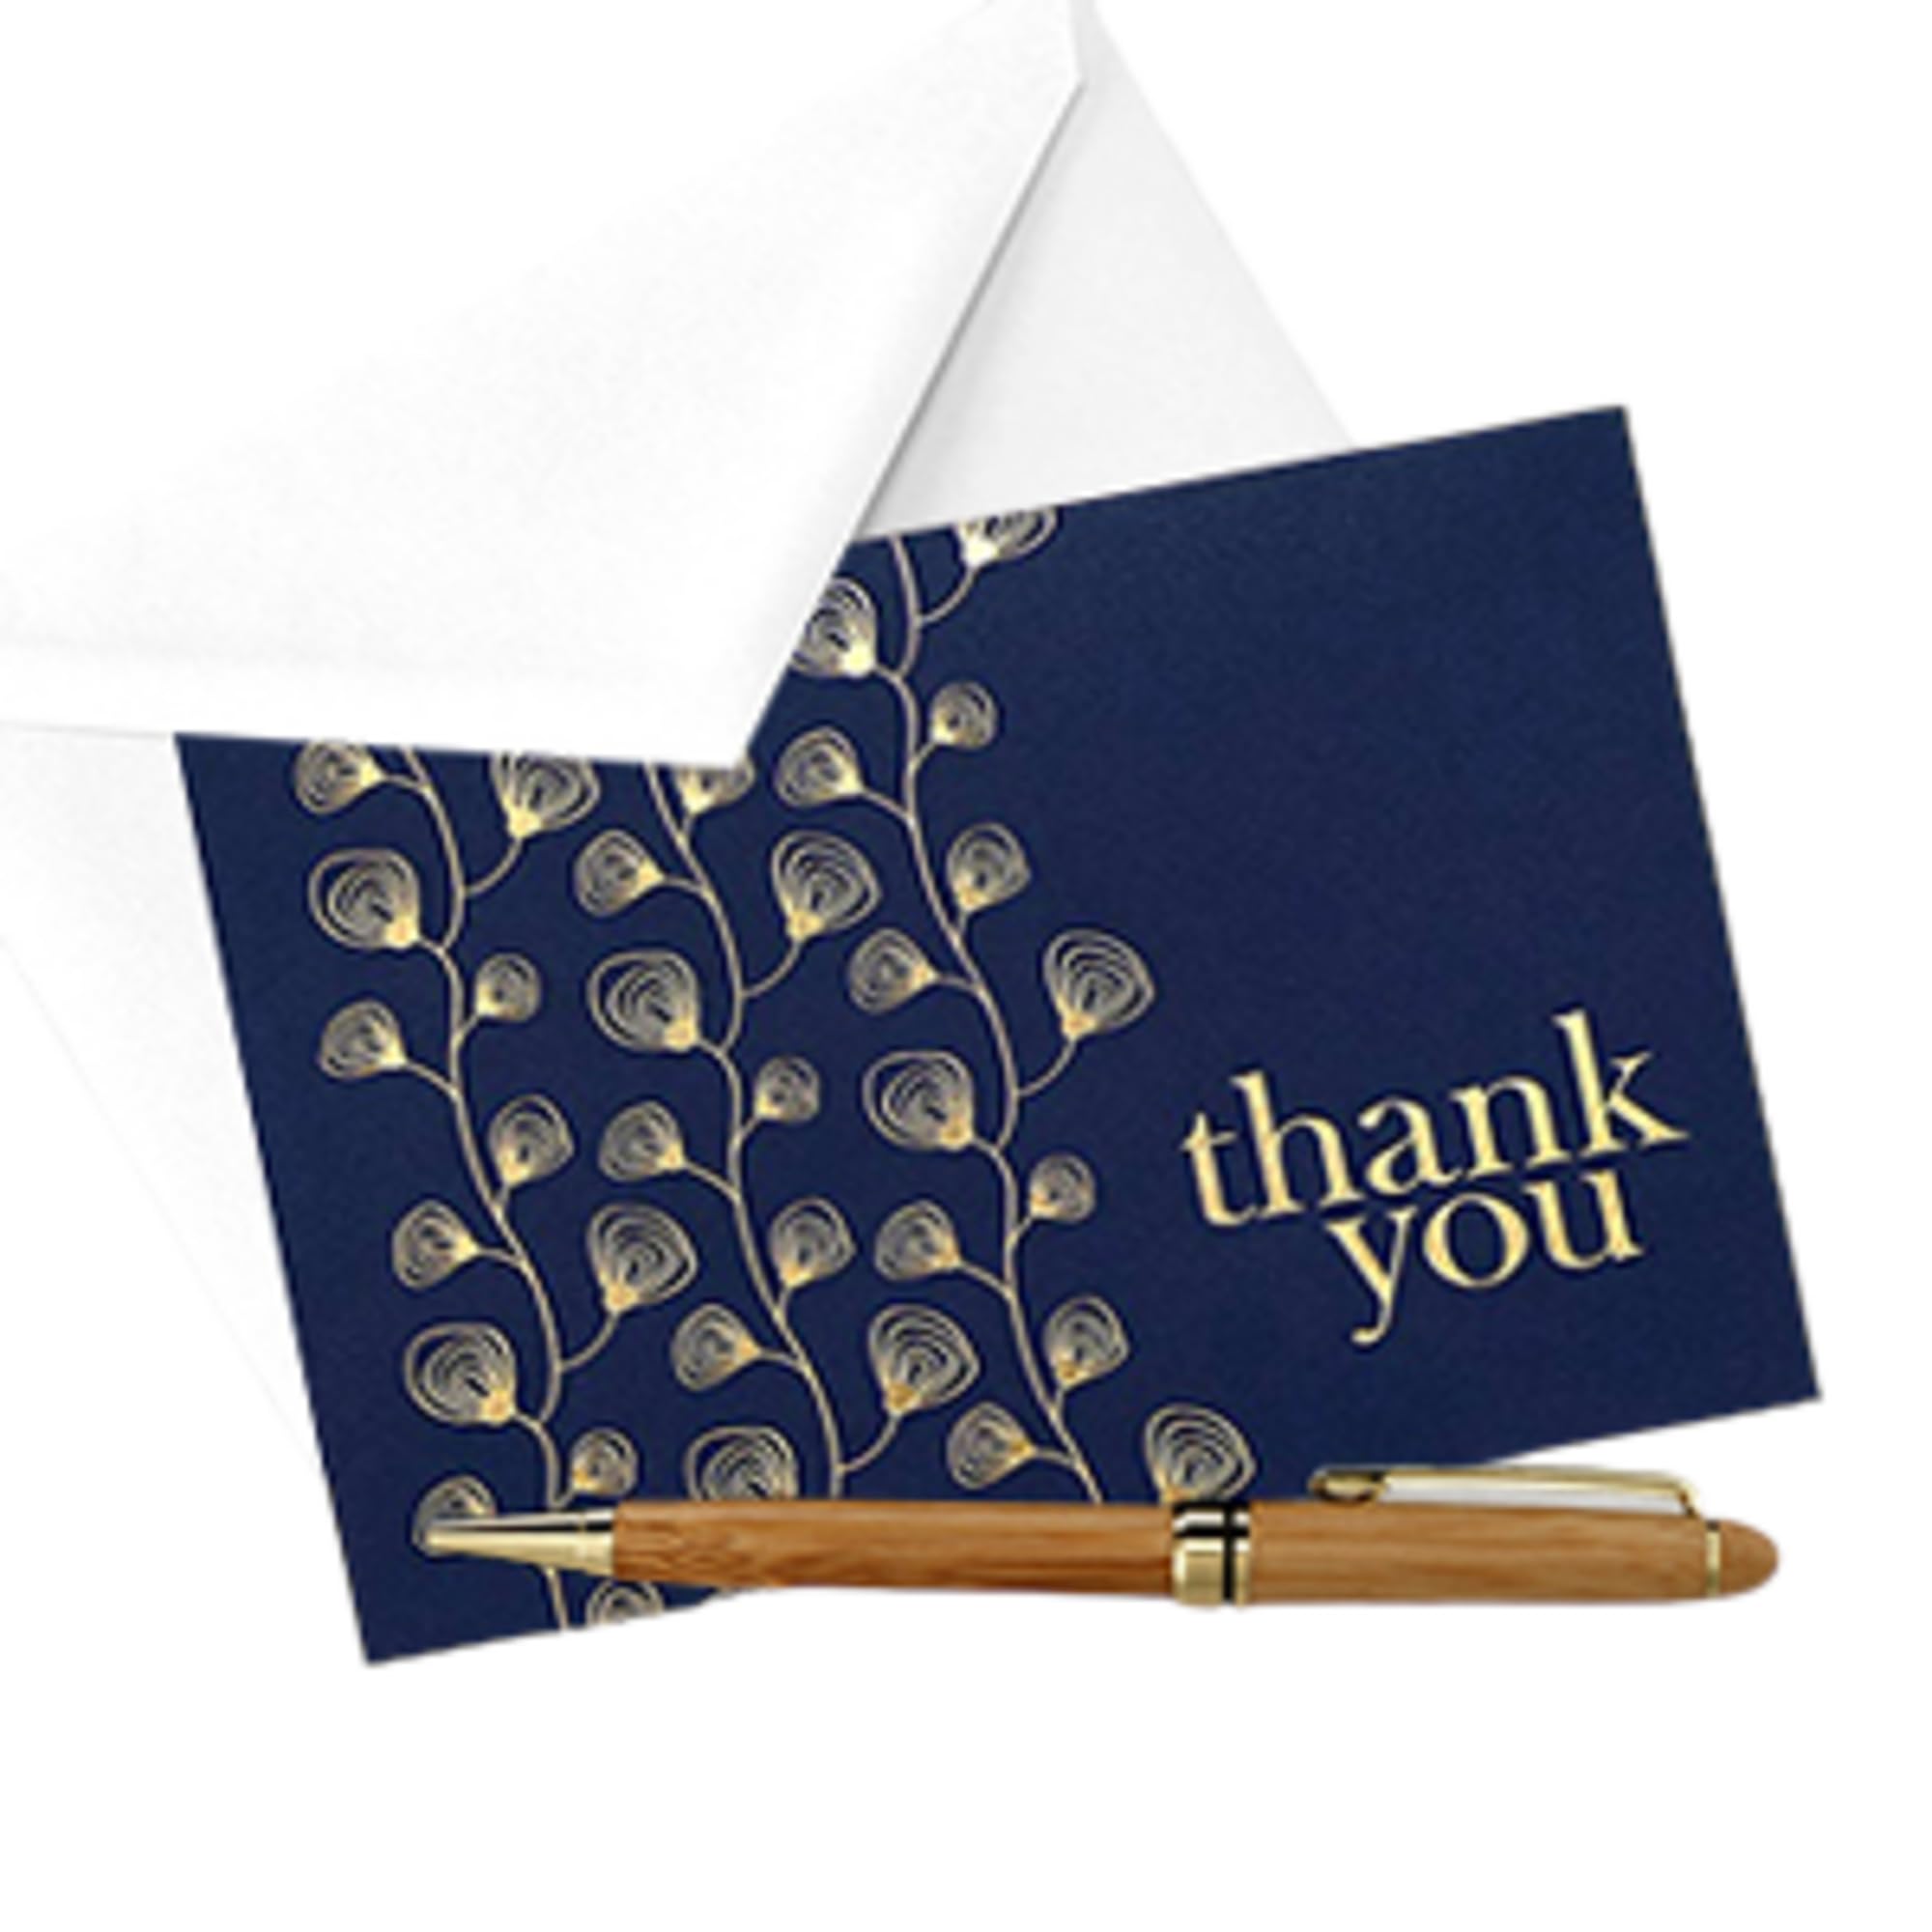 100 Bulk Thank You Cards with Envelopes - Professional Blank Wedding Thank You Cards - Thank You Notes Graduation, Small Business, Baby Shower, Funeral, Christmas, Sympathy - 4x6 Size Gold Navy Blue